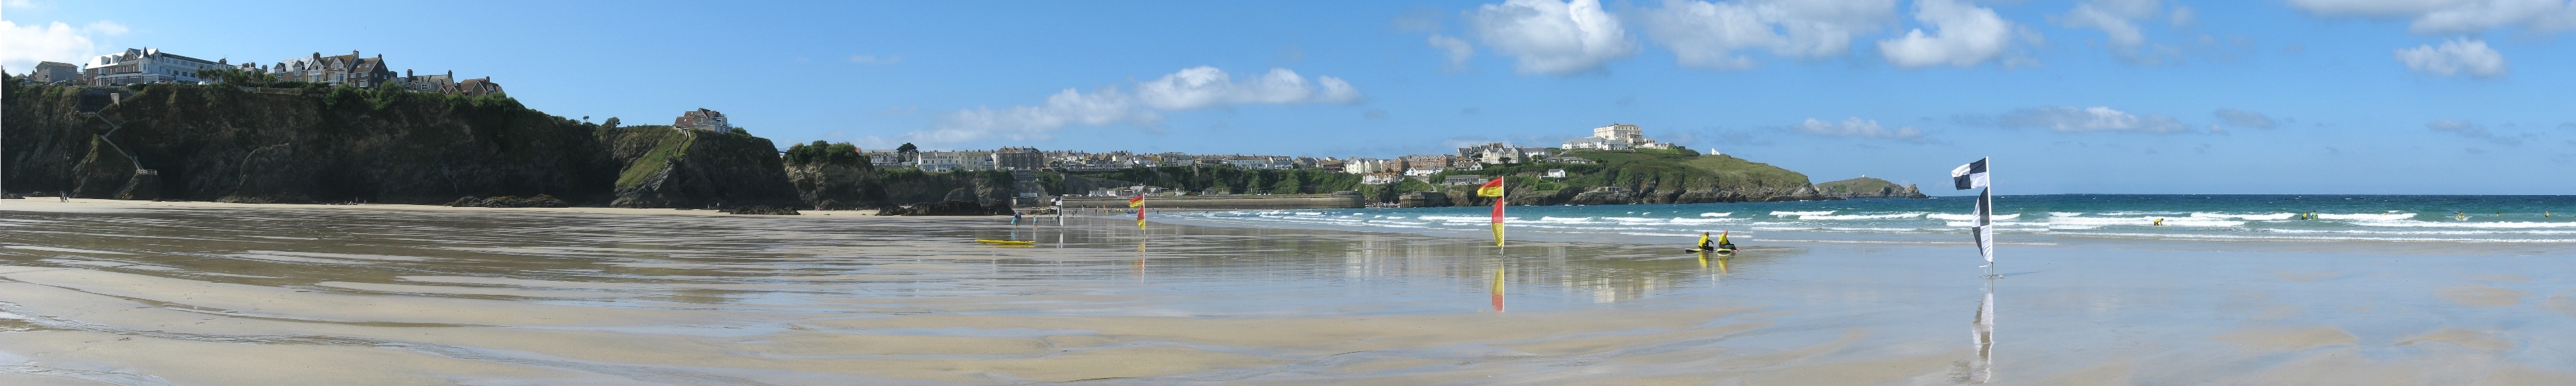 Panorama westward from Tolcarne Beach, Newquay, at close to low-tide. From left to right: Newquay buildings on clifftop; Newquay harbour entrance; The Atlantic Hotel and headland; Towan Head in distance. Two lifeguards sitting on boards in the foreground.